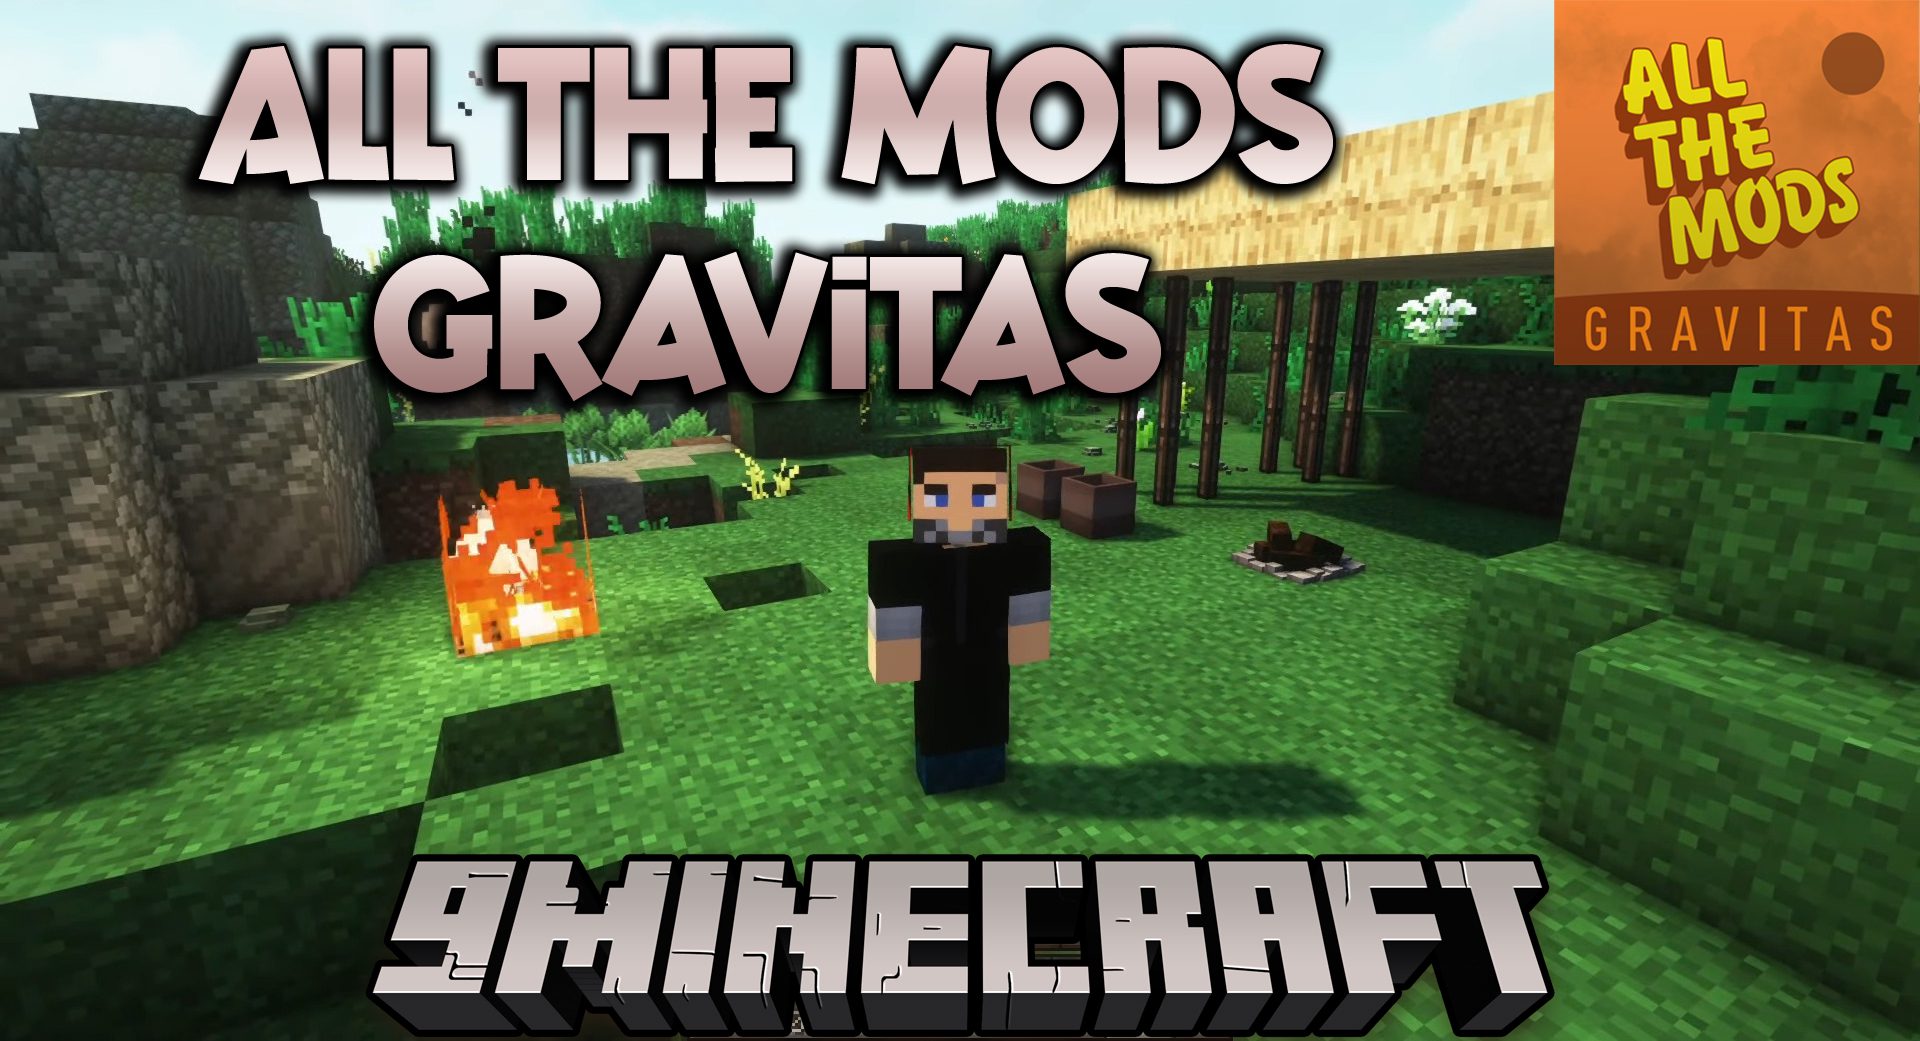 All the Mods Gravitas Modpack (1.18.2) - TerraFirmaCraft Meets All the Mods 1